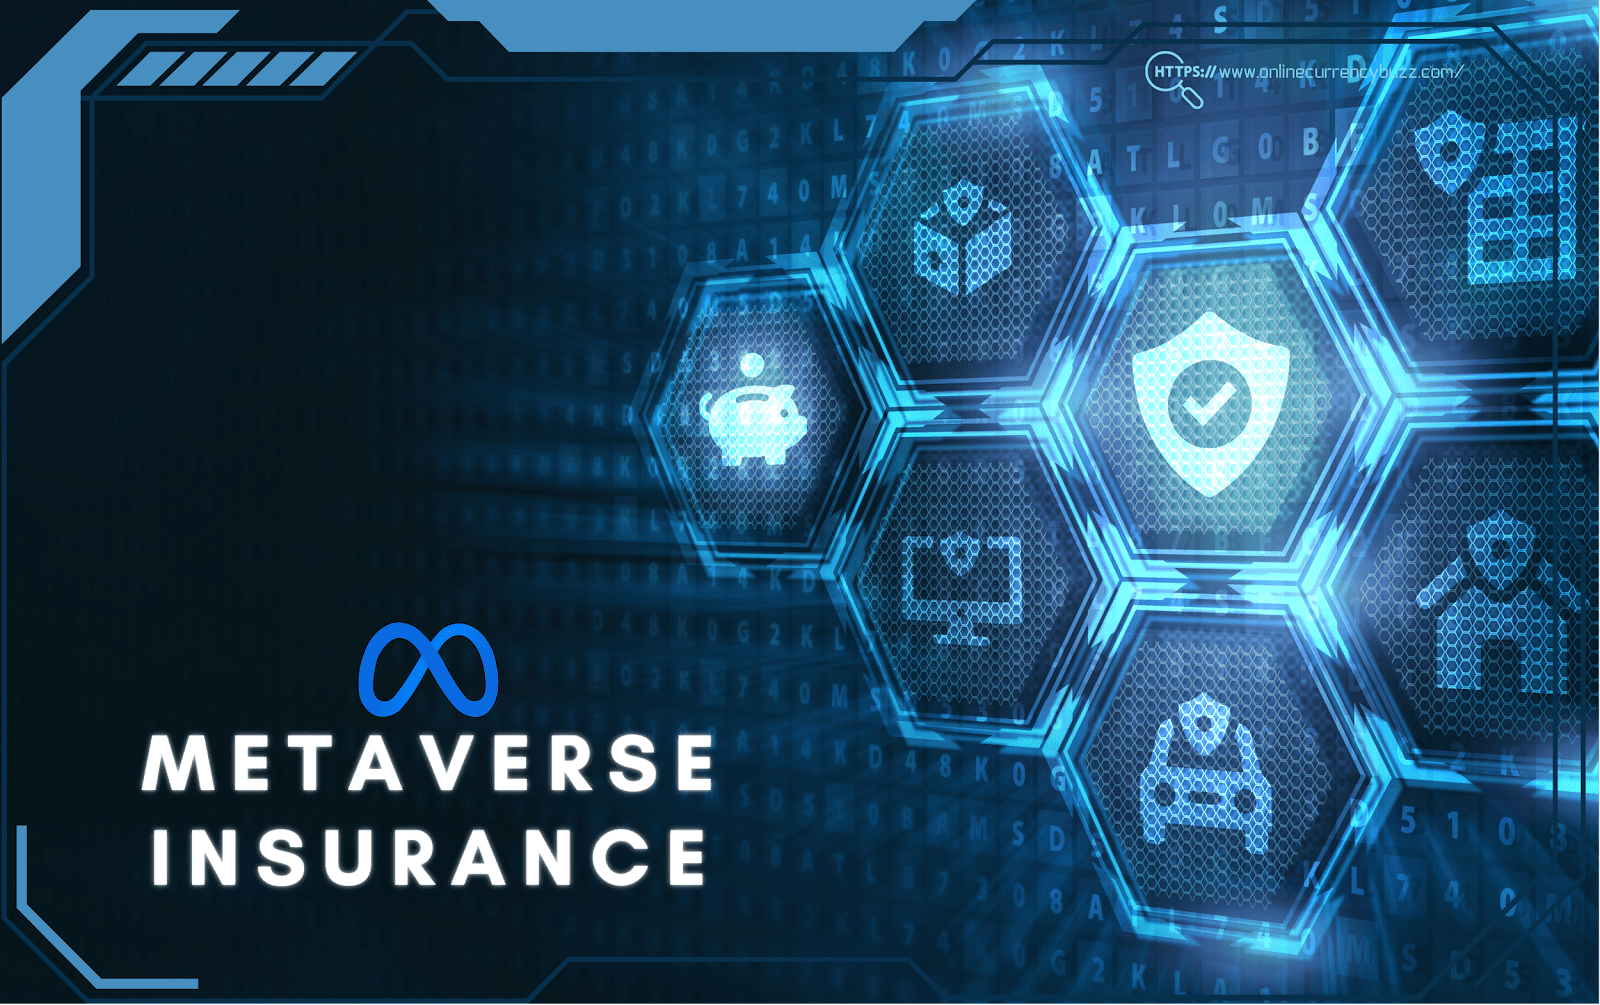 What is insurance in the metaverse?